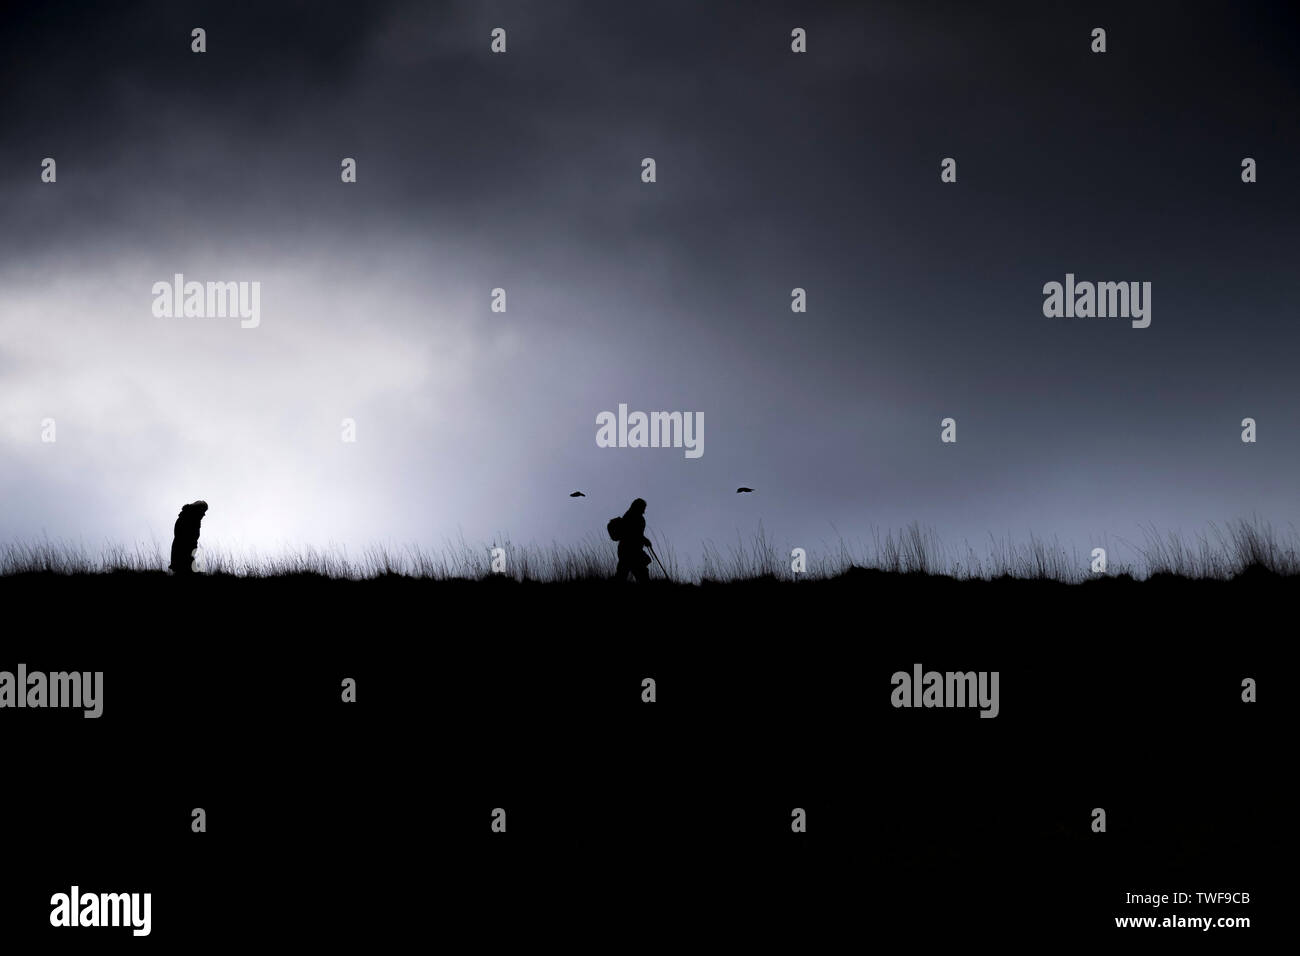 Walkers silhouetted against a brooding stormy sky. Stock Photo